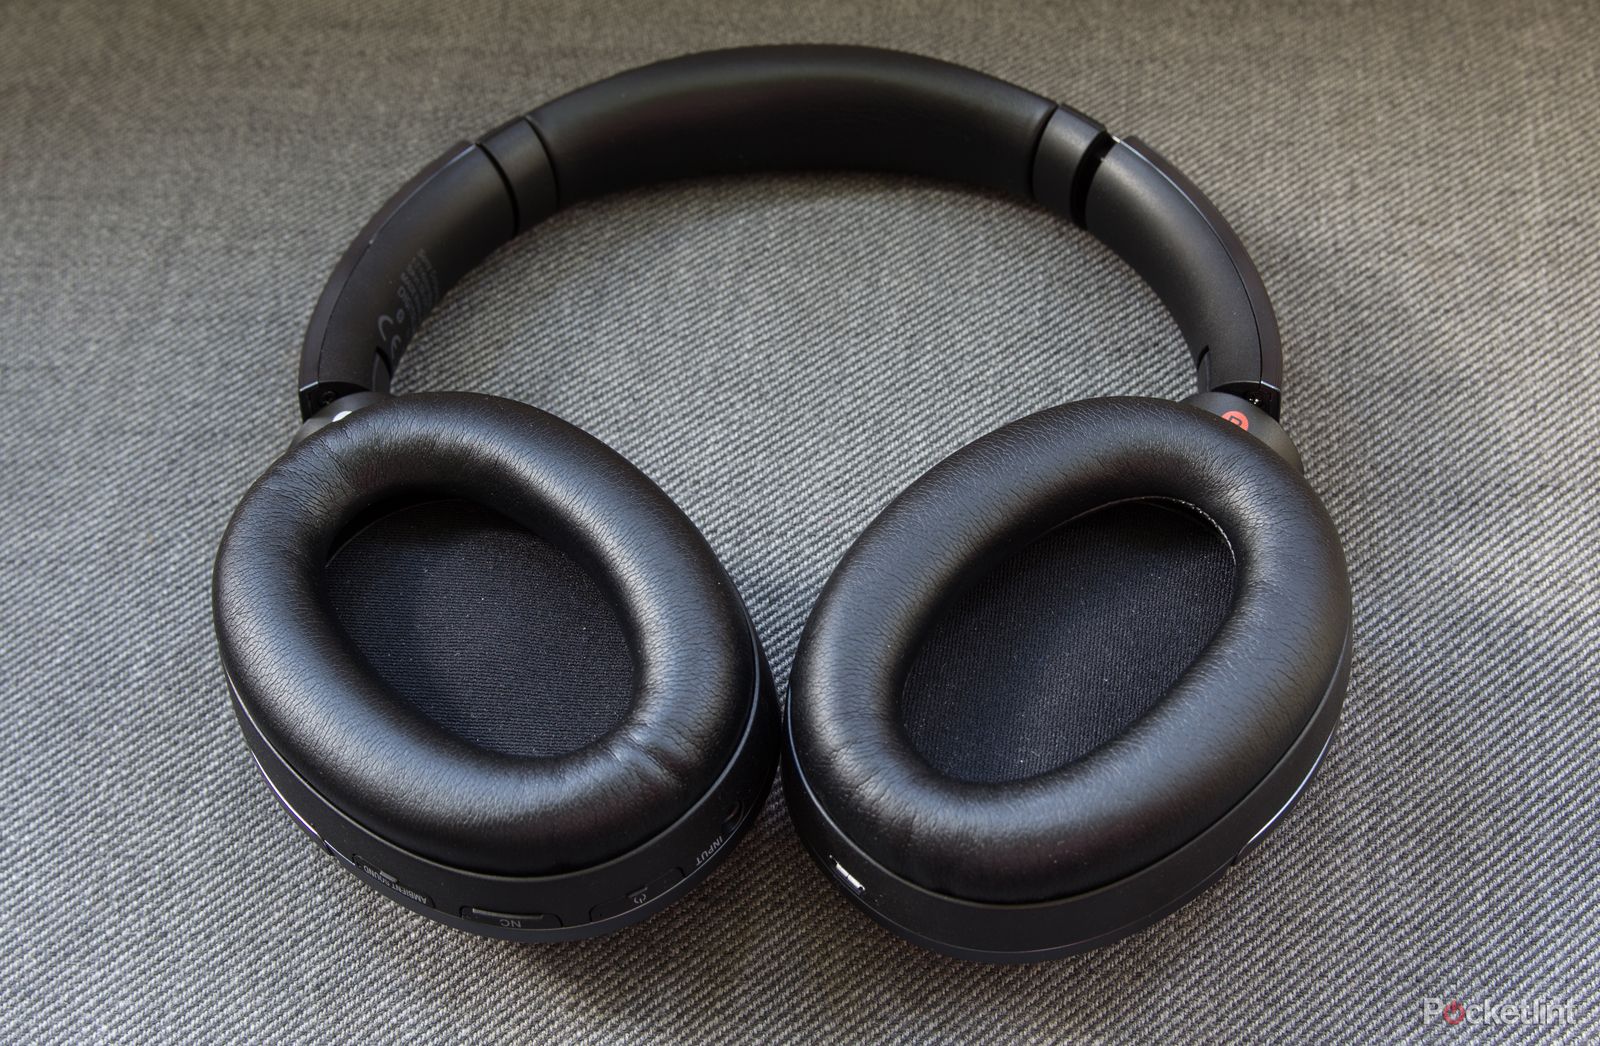 sony mdr 1000x review image 5